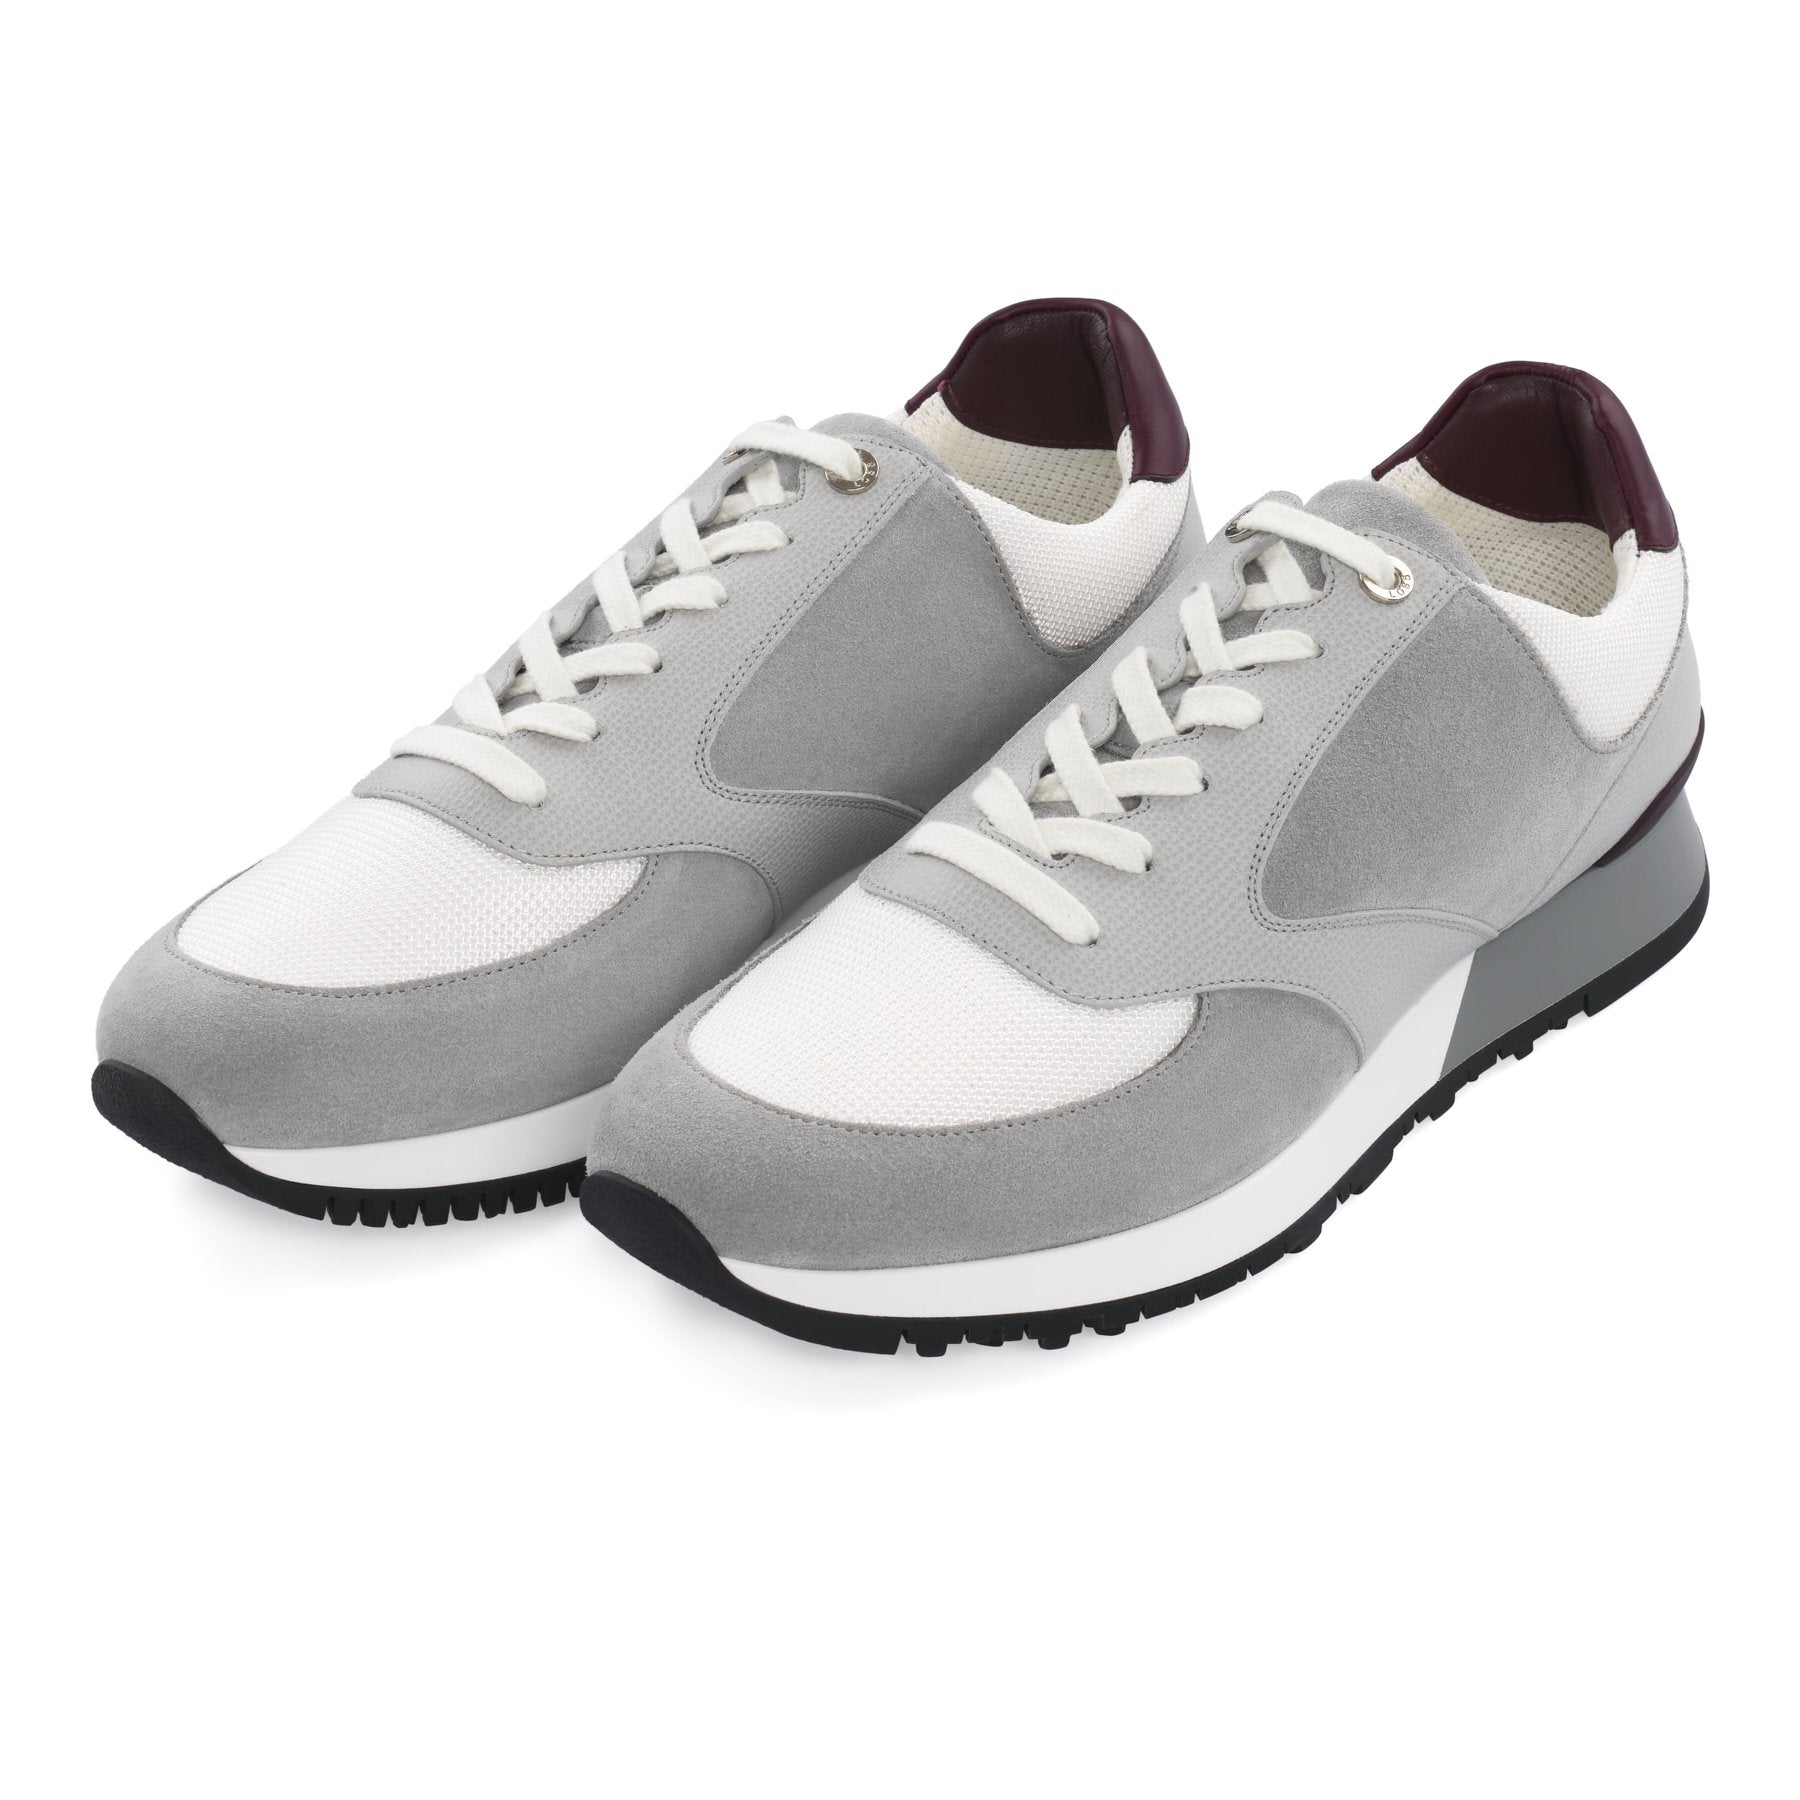 "Foundry" Suede and Leather Sneakers in Light Grey